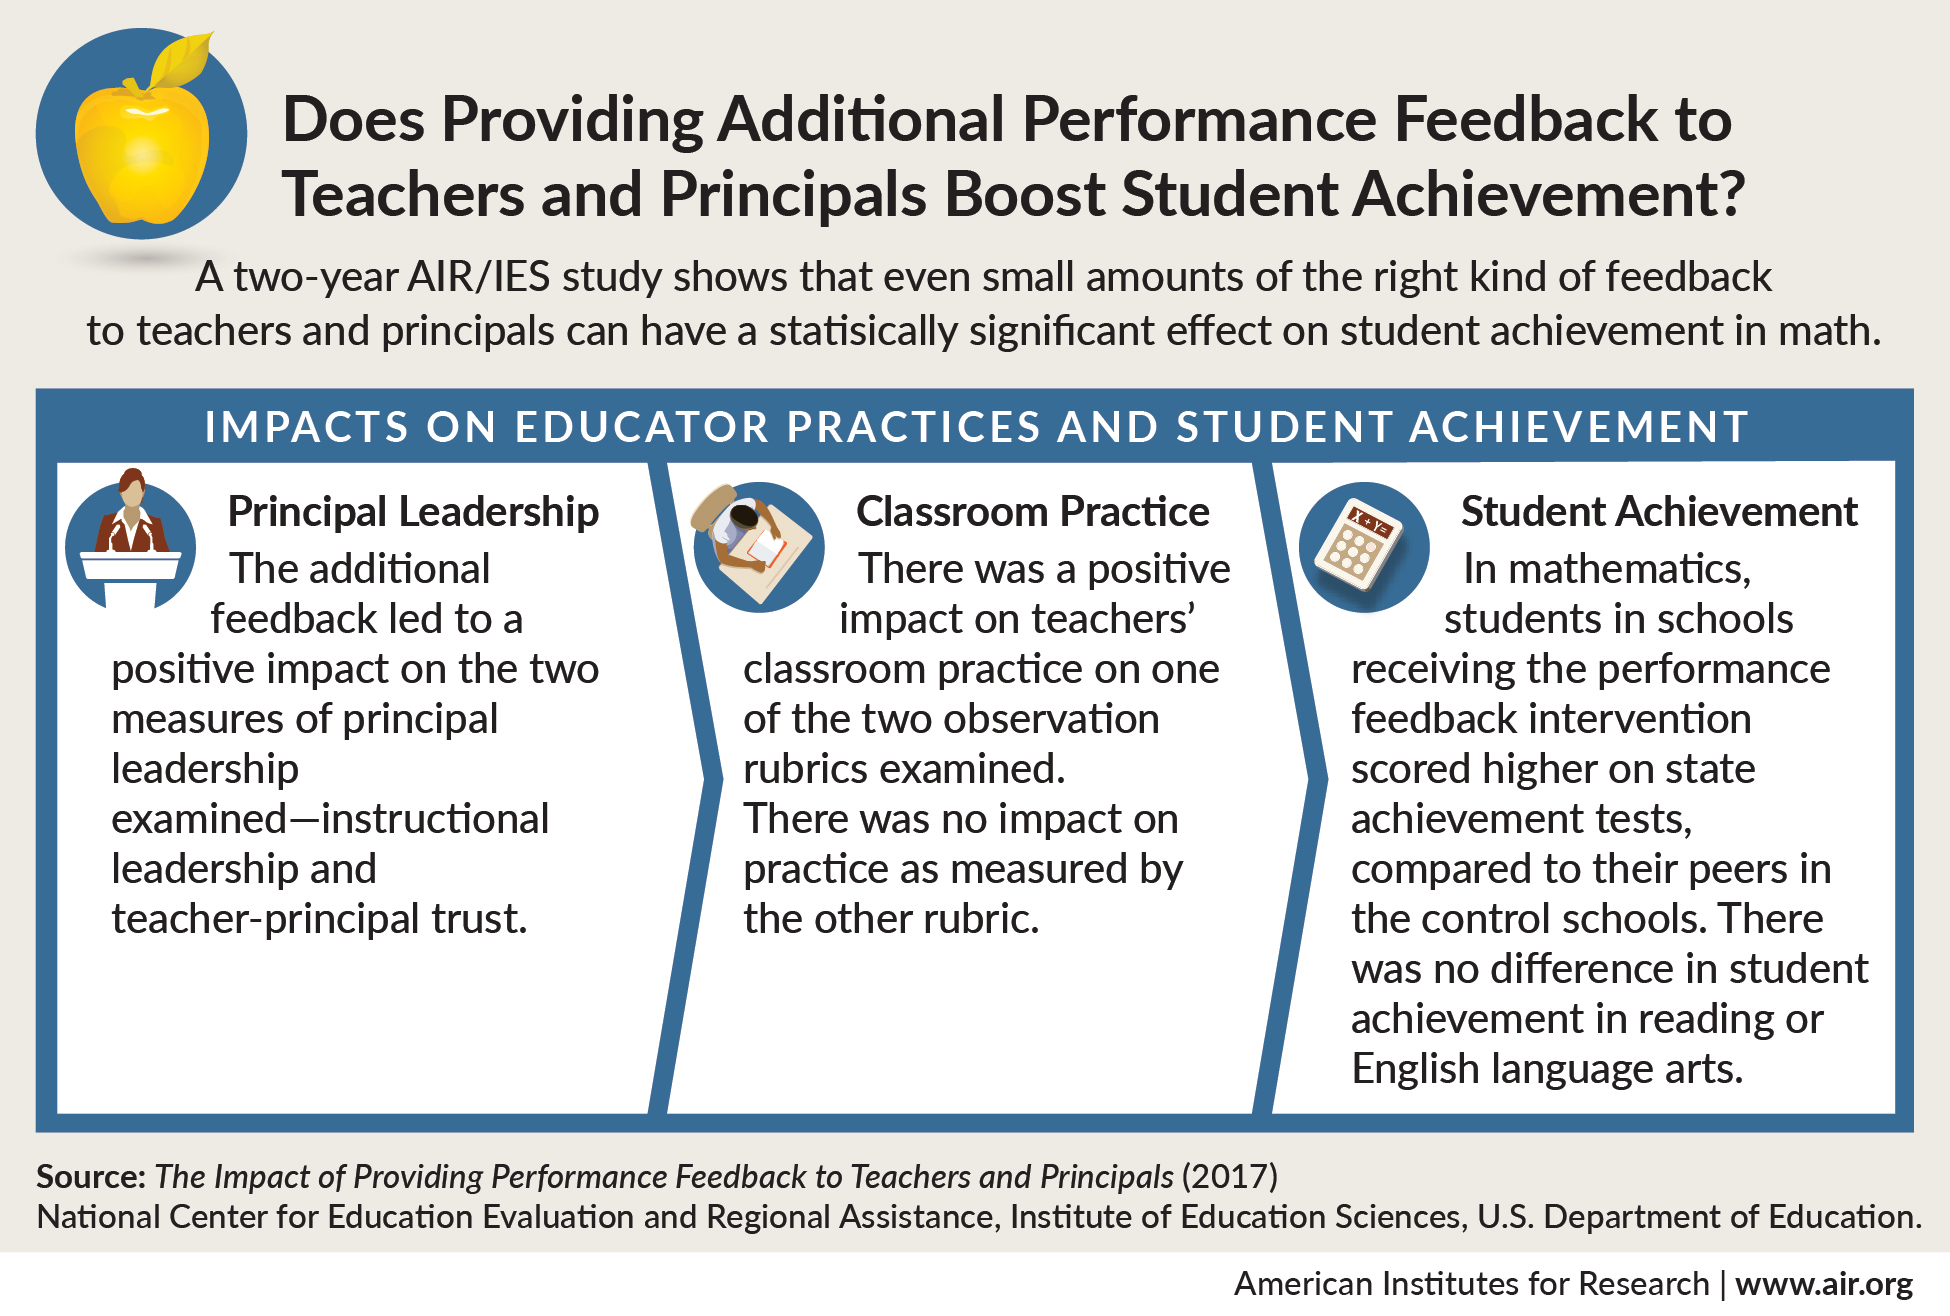 Infographic highlights the statistically significant effects that additional performance feedback has on educator practices and students achievement.